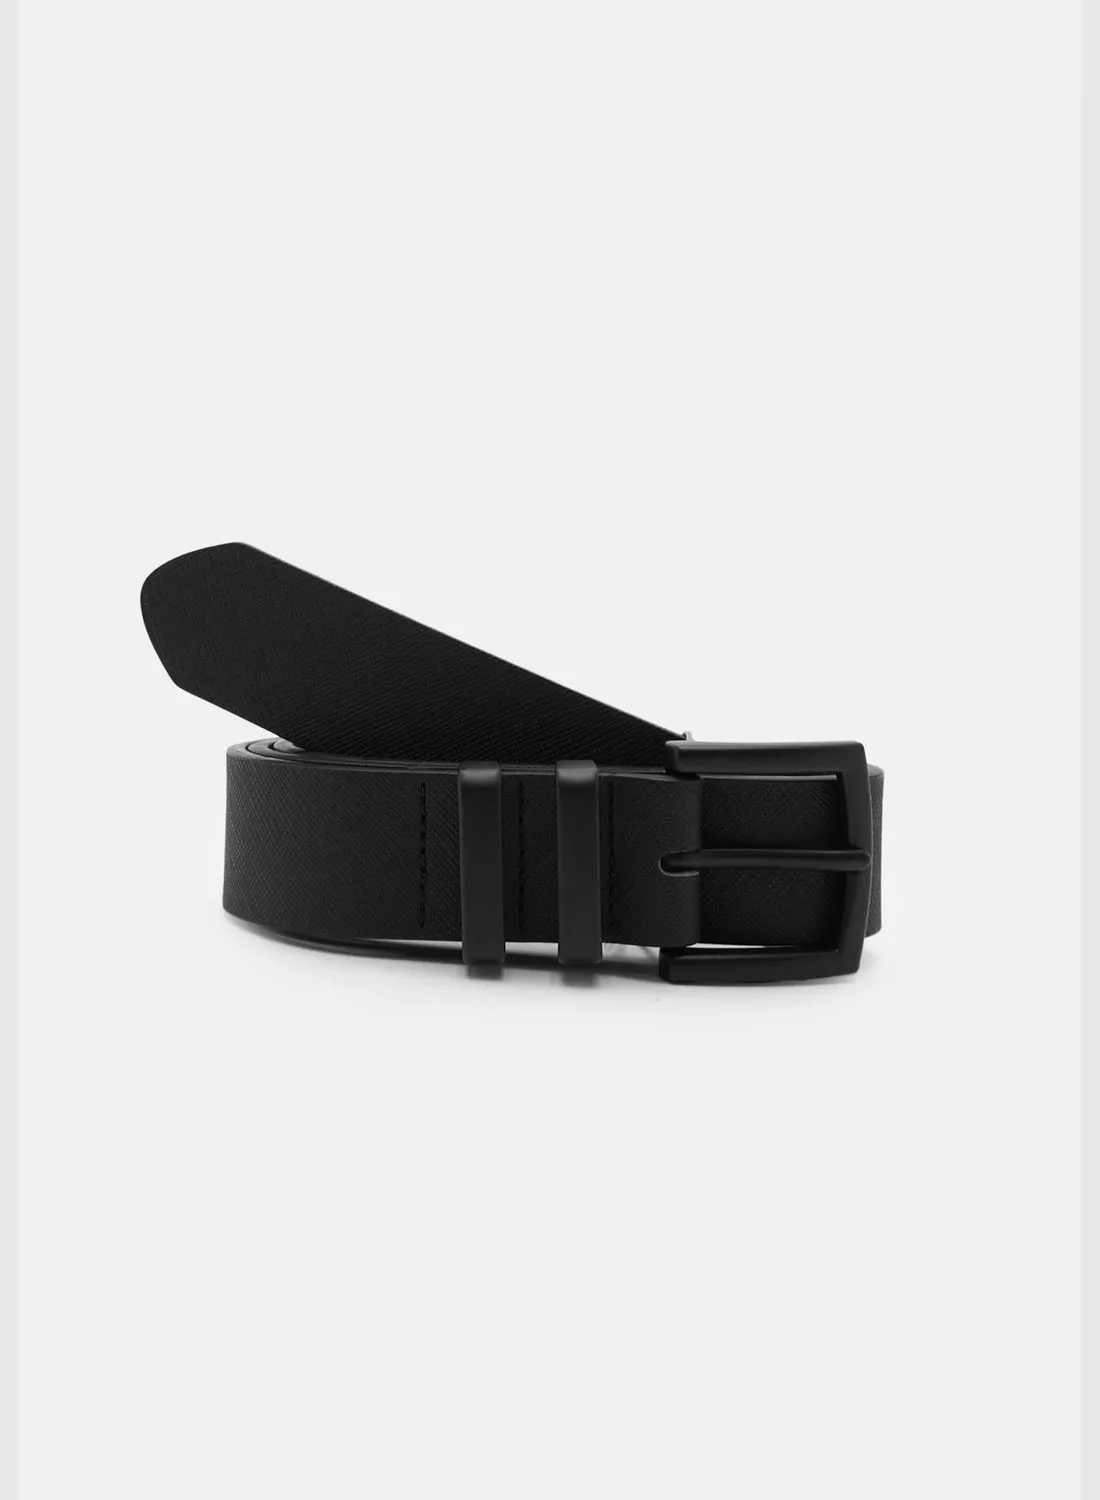 PULL&BEAR Black leather effect belt with double buckle